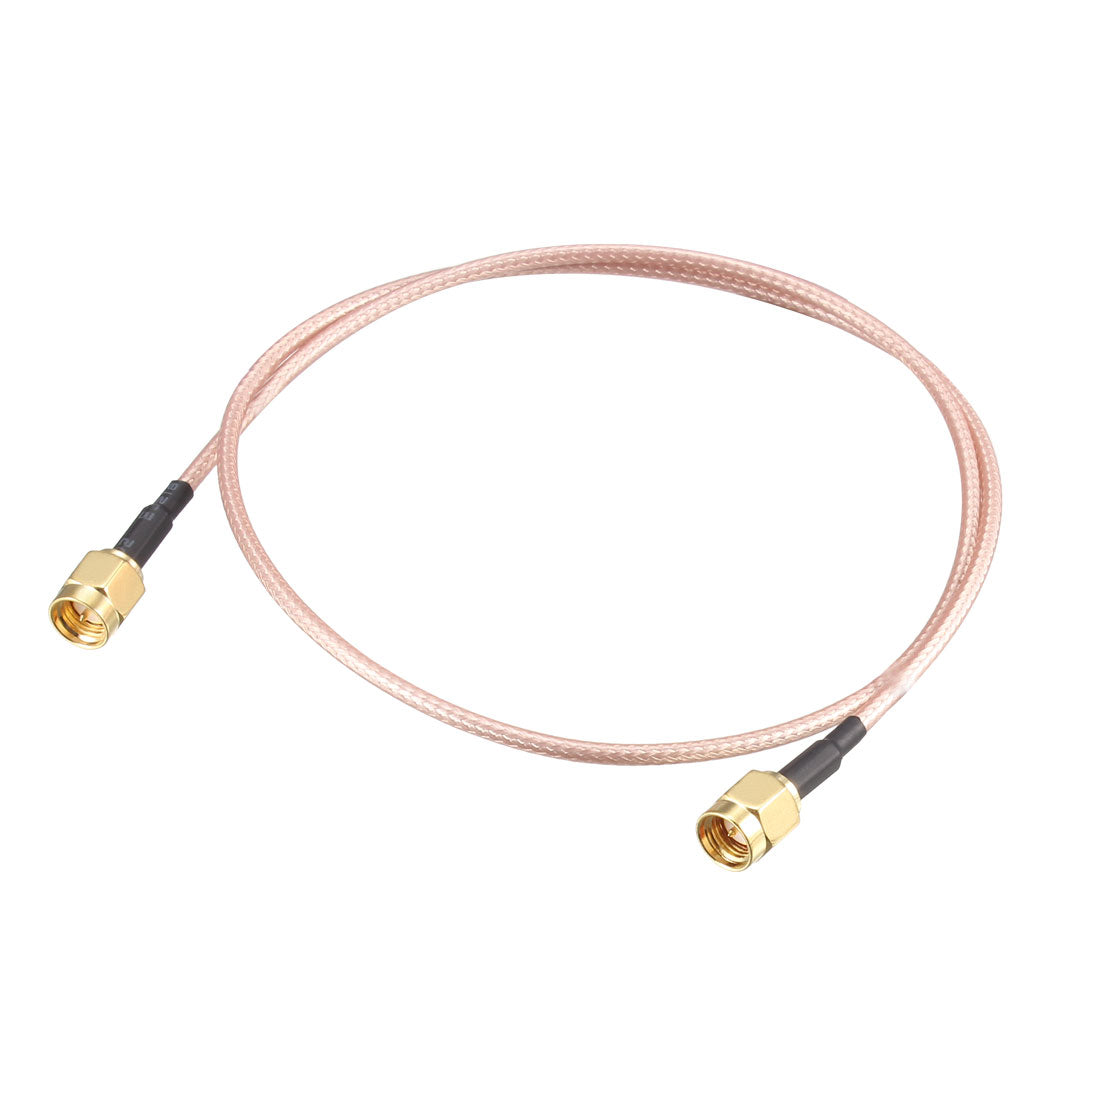 Uxcell Uxcell Low Loss RF Coaxial Cable Connection Coax Wire RG-316, SMA Male to SMA Male 10cm 5pcs